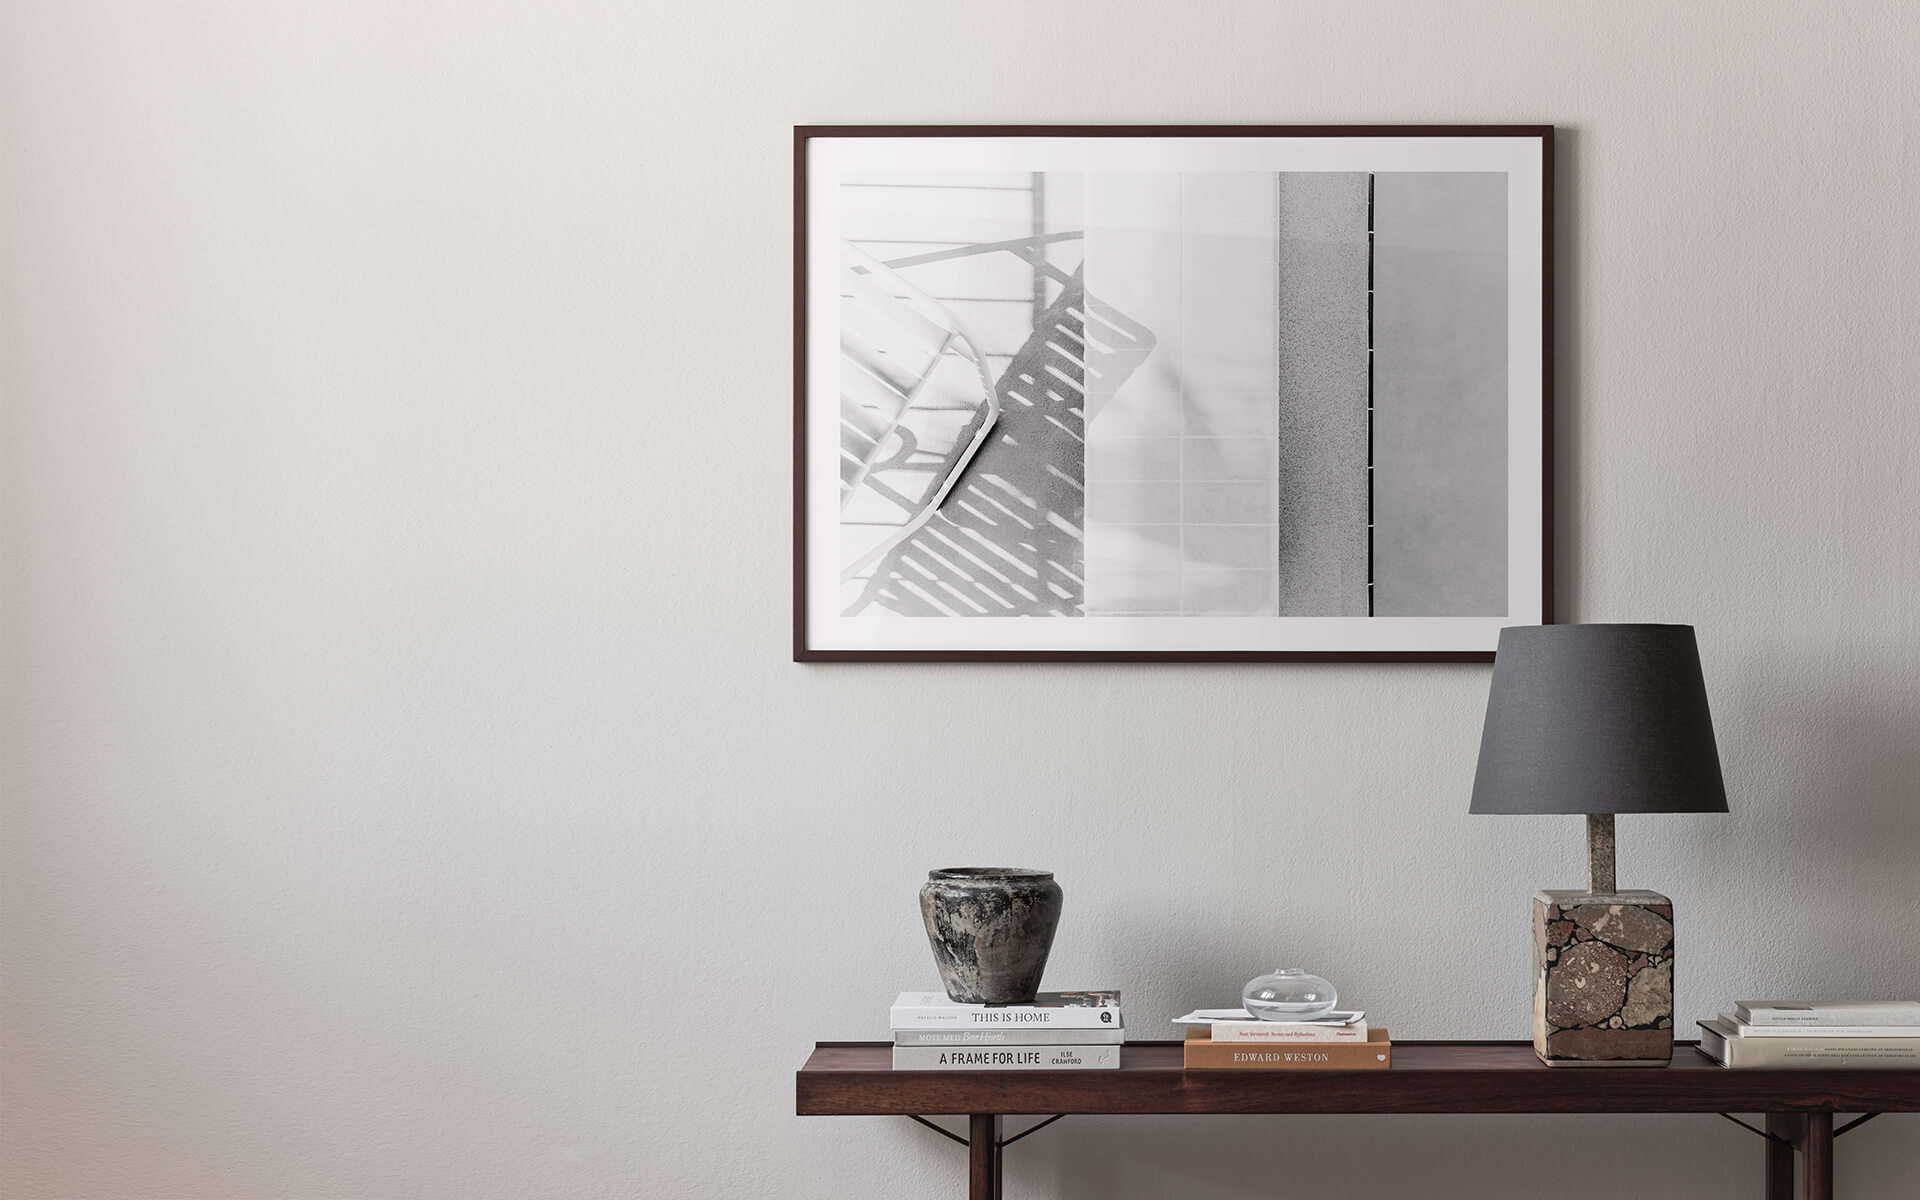 Minimalistic scandinavian interior with black and white photo art in wooden frame